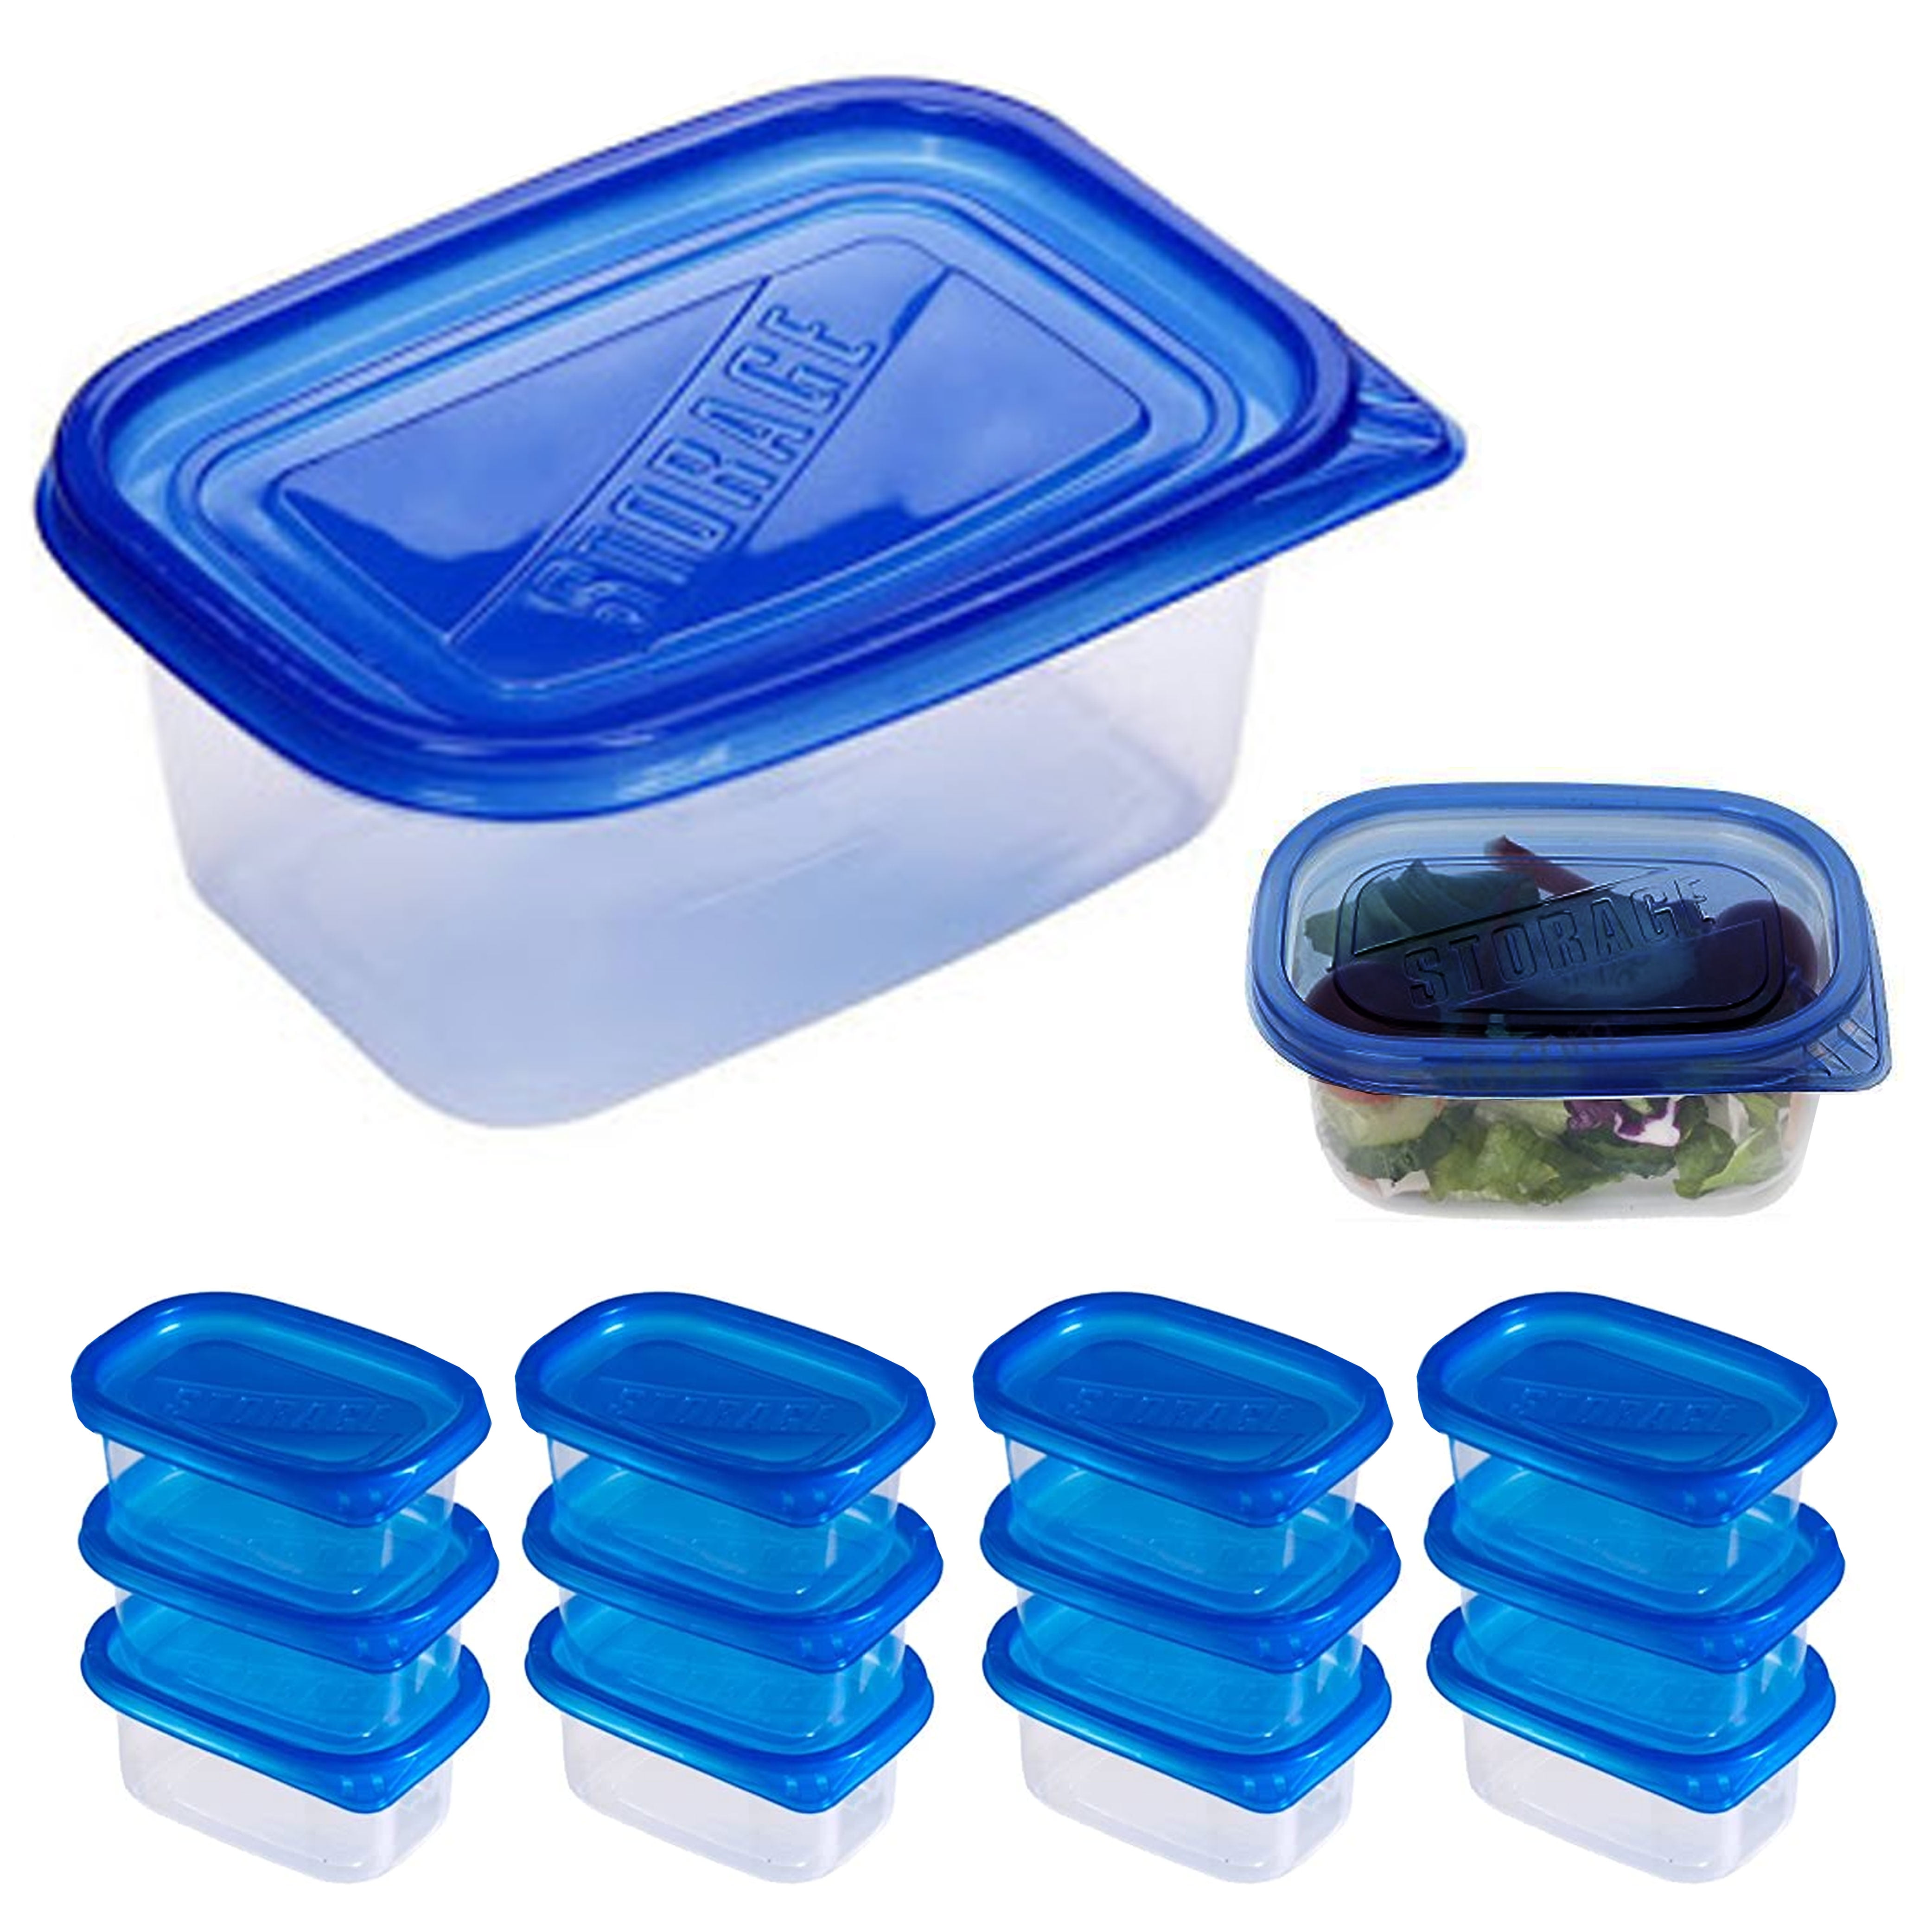 JJOO 10pcs Food Storage Containers with Lids, Reusable Meal Prep Containers, Airtight Plastic Freezer Containers for Pantry, Microwave and